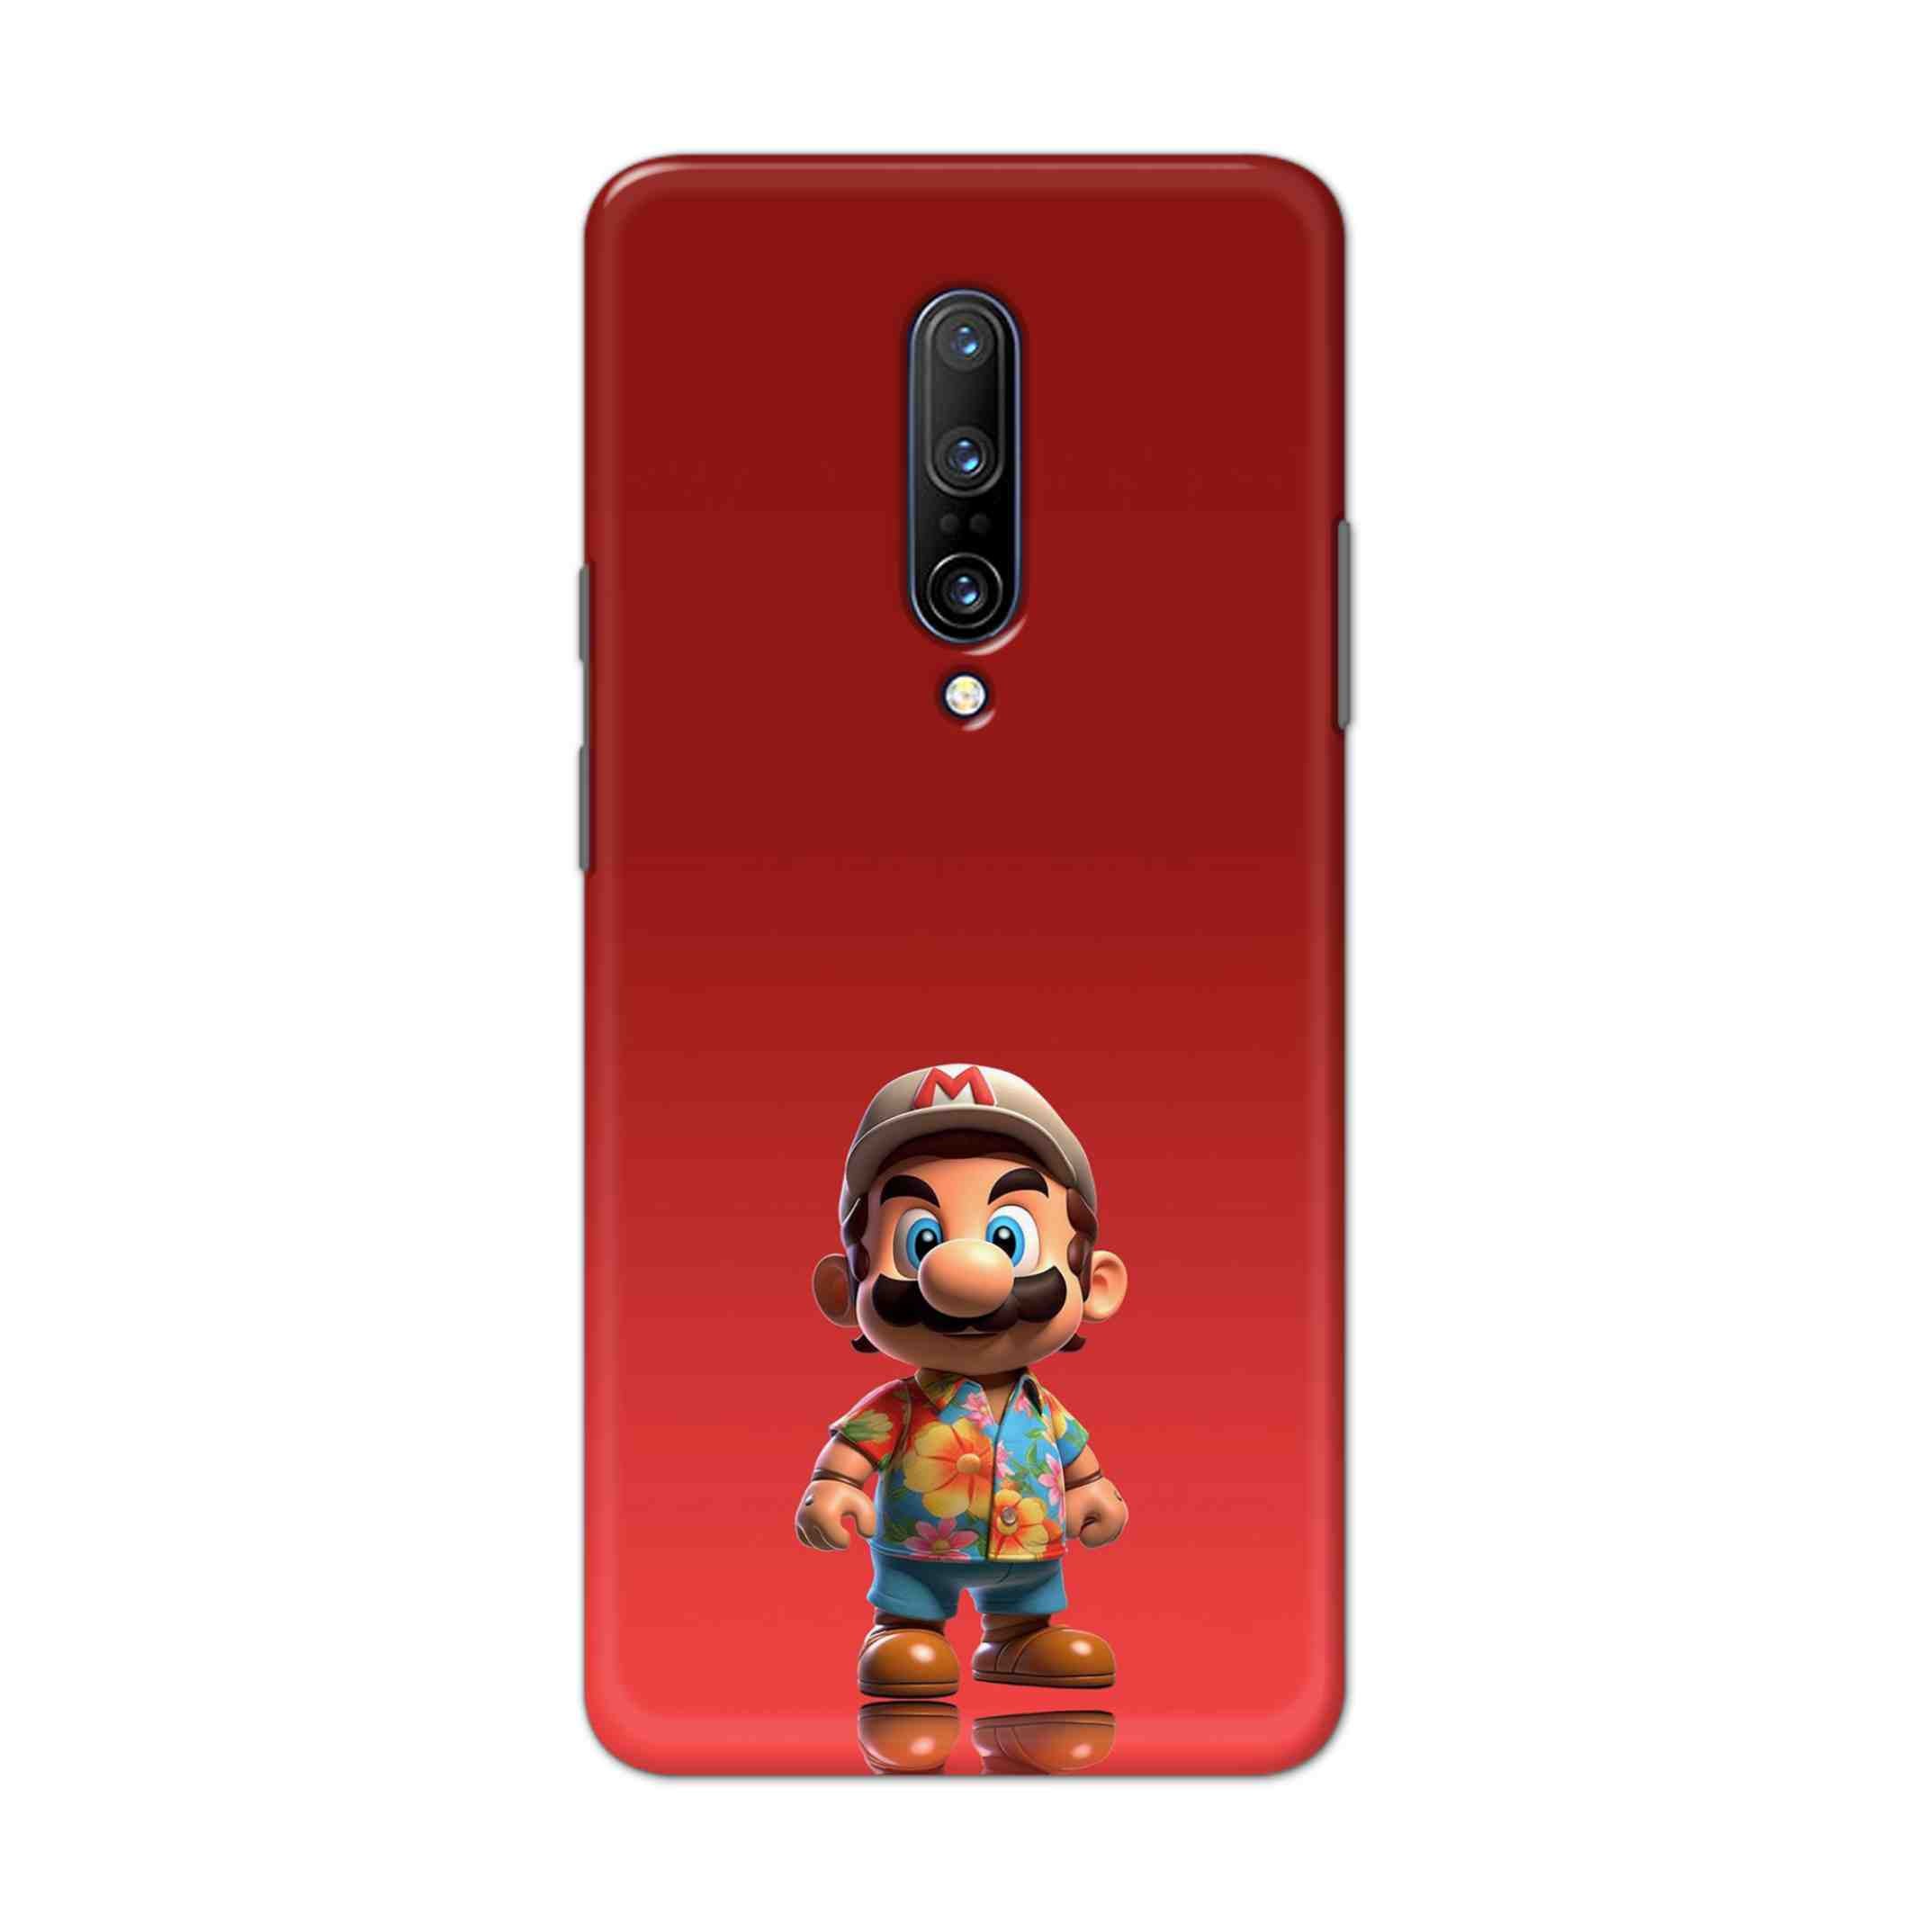 Buy Mario Hard Back Mobile Phone Case Cover For OnePlus 7 Pro Online